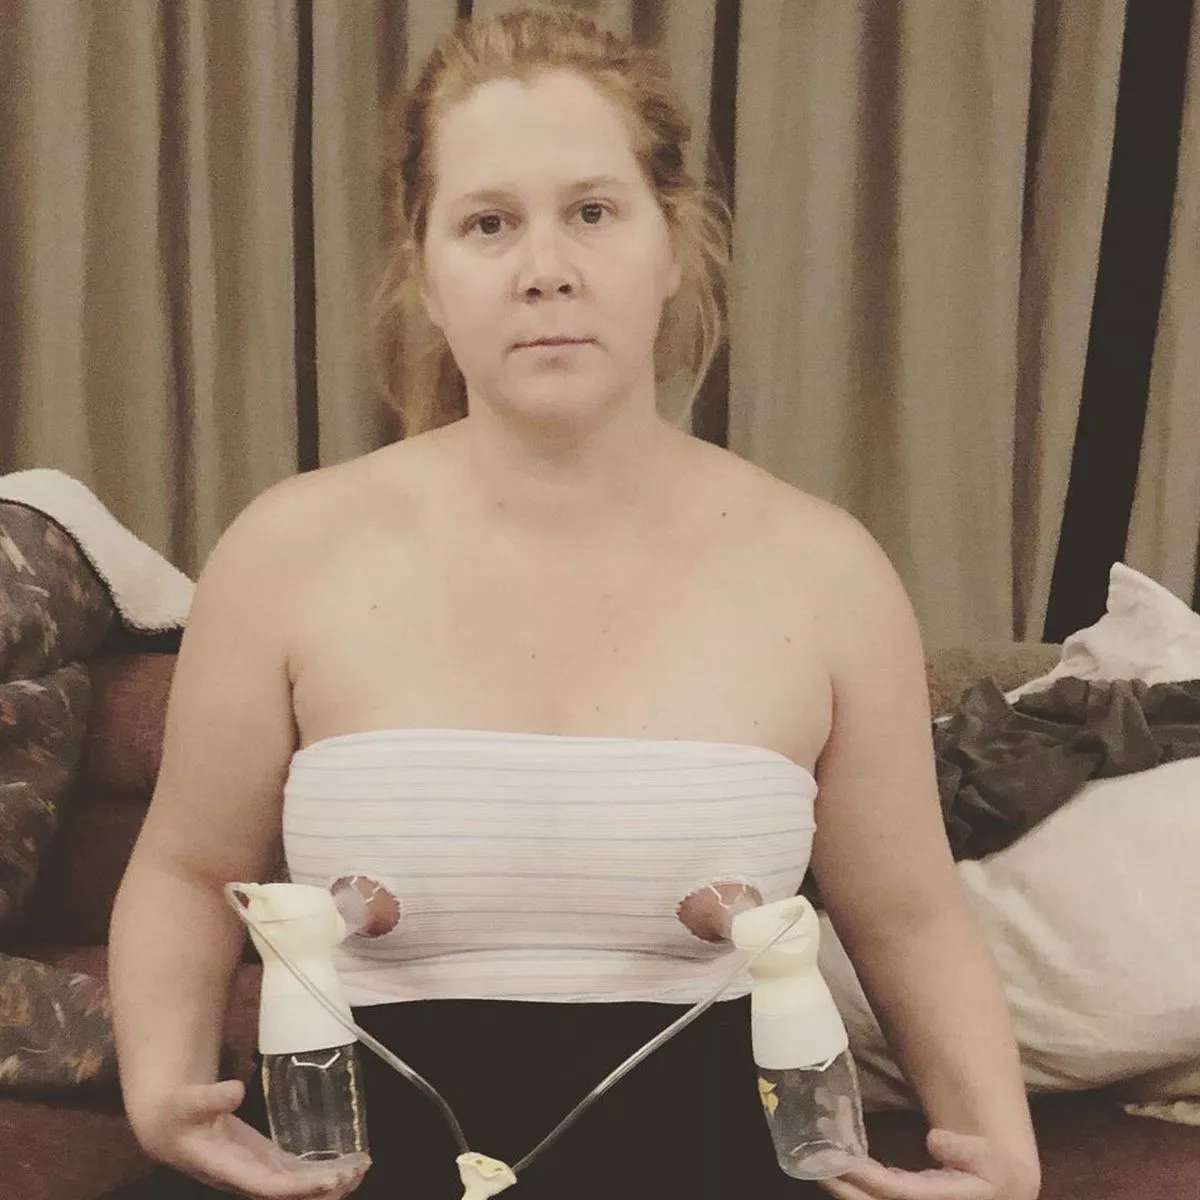 chris manny recommends amy schumer bare tit pic